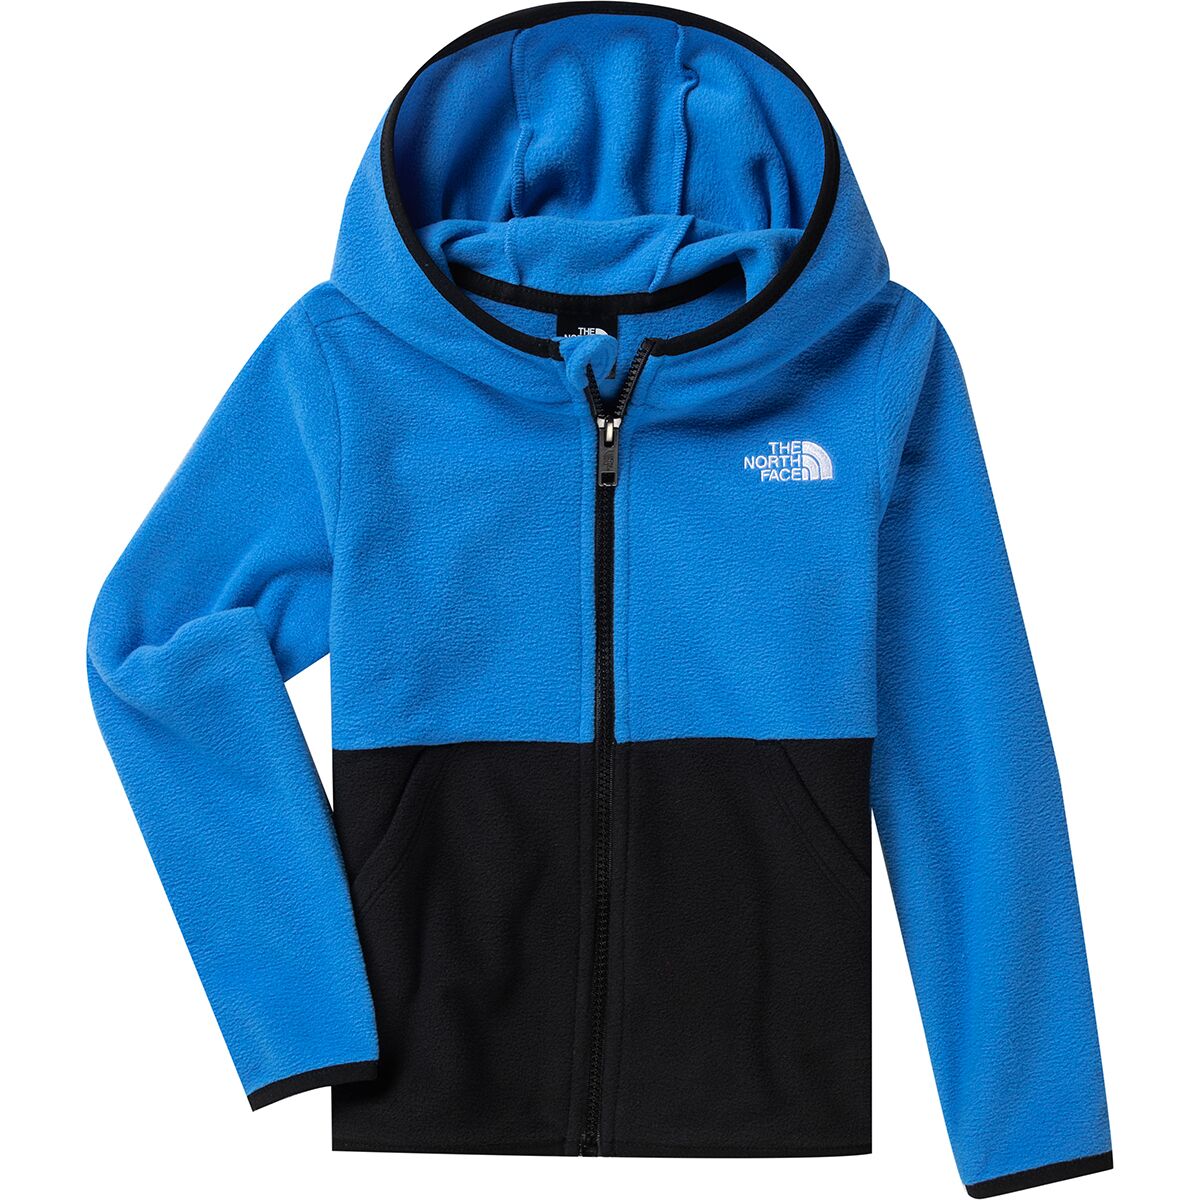 The North Face Kids' Clothing | Backcountry.com